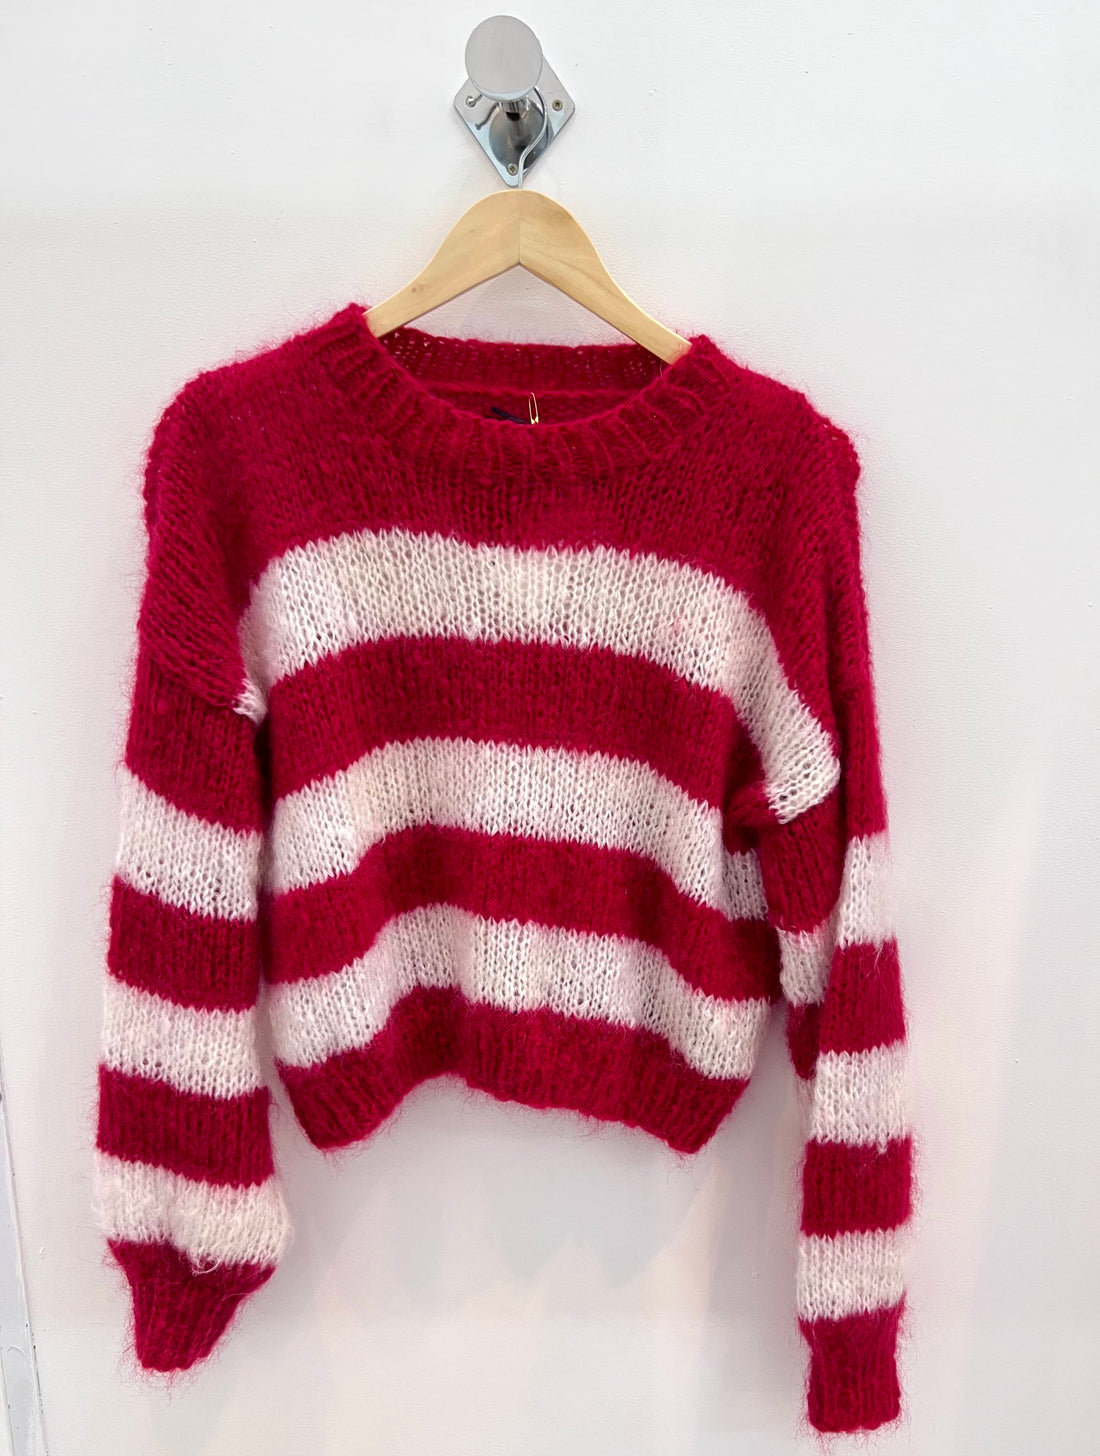 Red and white knit jumper